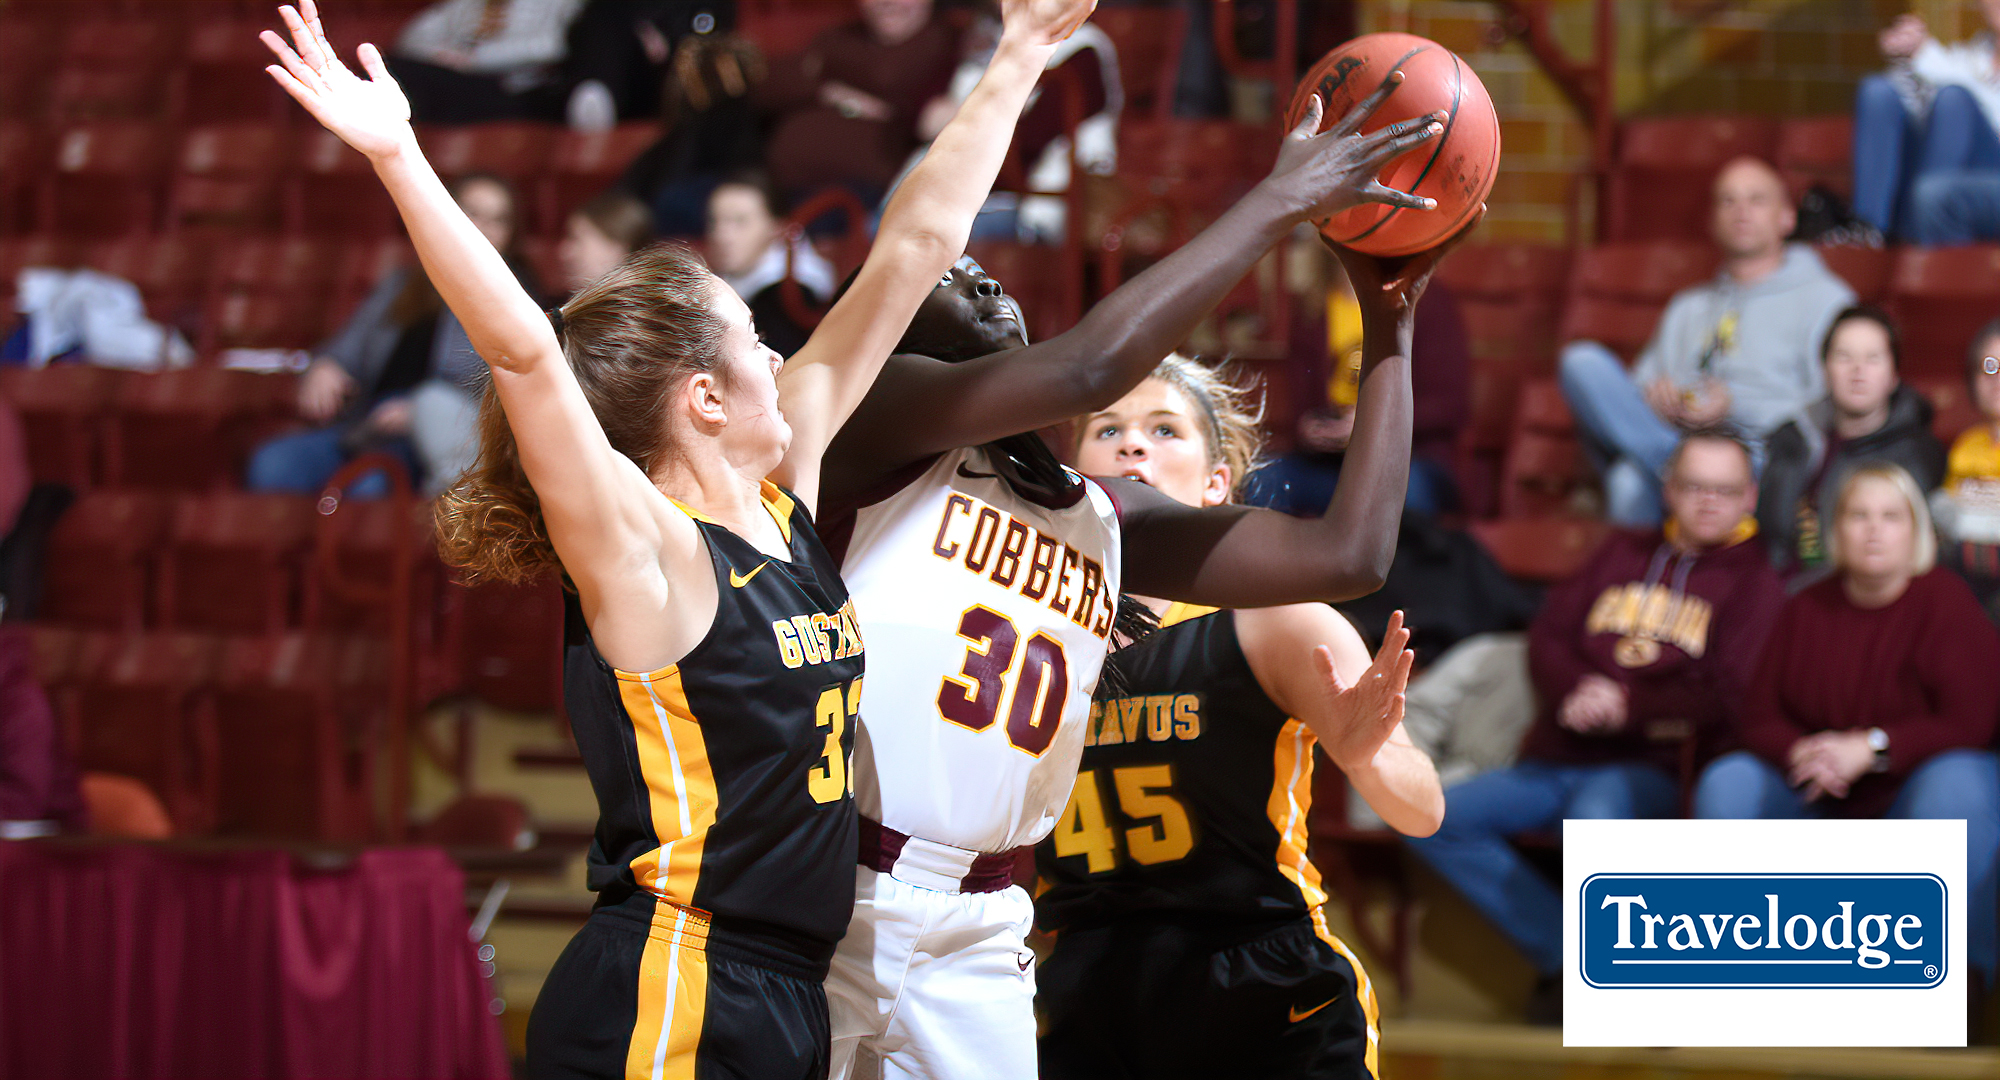 Junior Mary Sem went 6-for-9 from the floor and 9-for-11 from the free throw line and finished with a game-high 21 points in the Cobbers loss at Gustavus (Pic taken in 2019)